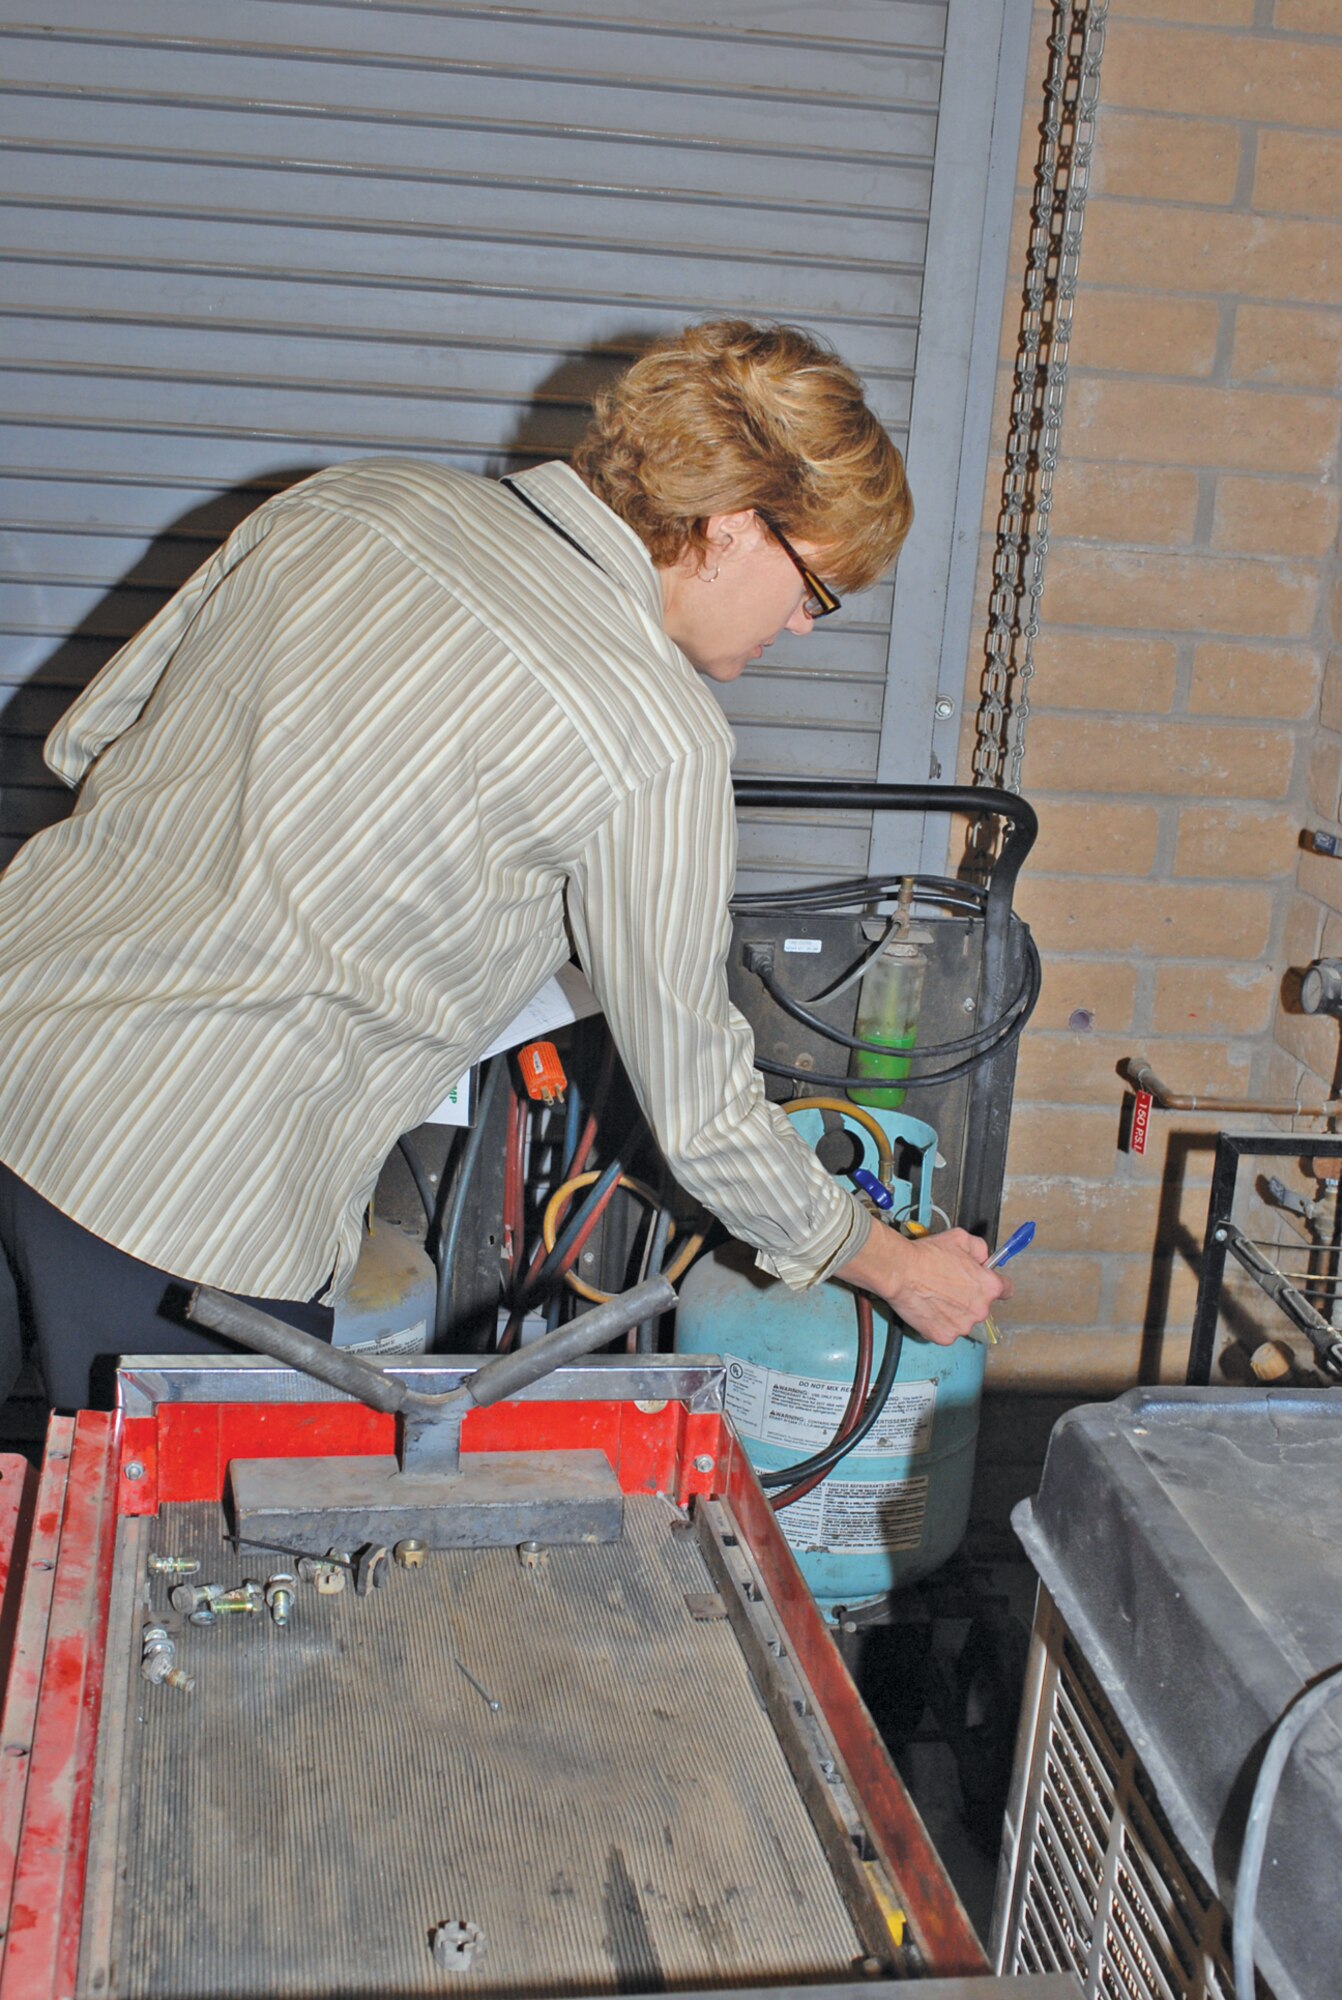 Sally Miller, certified industrial hygienist, conducts an environmental safety and occupational health inspection May 6 in Luke Air Force Base Auto Hobby Shop. The week-long assessment viewed Luke’s mission and daily work routines. The purpose behind the Environmental Safety and Occupational Health Compliance Assessment Management Program inspection is to help manage environmental, safety and occupational health risks while continually improving Luke’s overall performance. (U.S. Air Force photo by Airman 1st Class Sandra Welch)